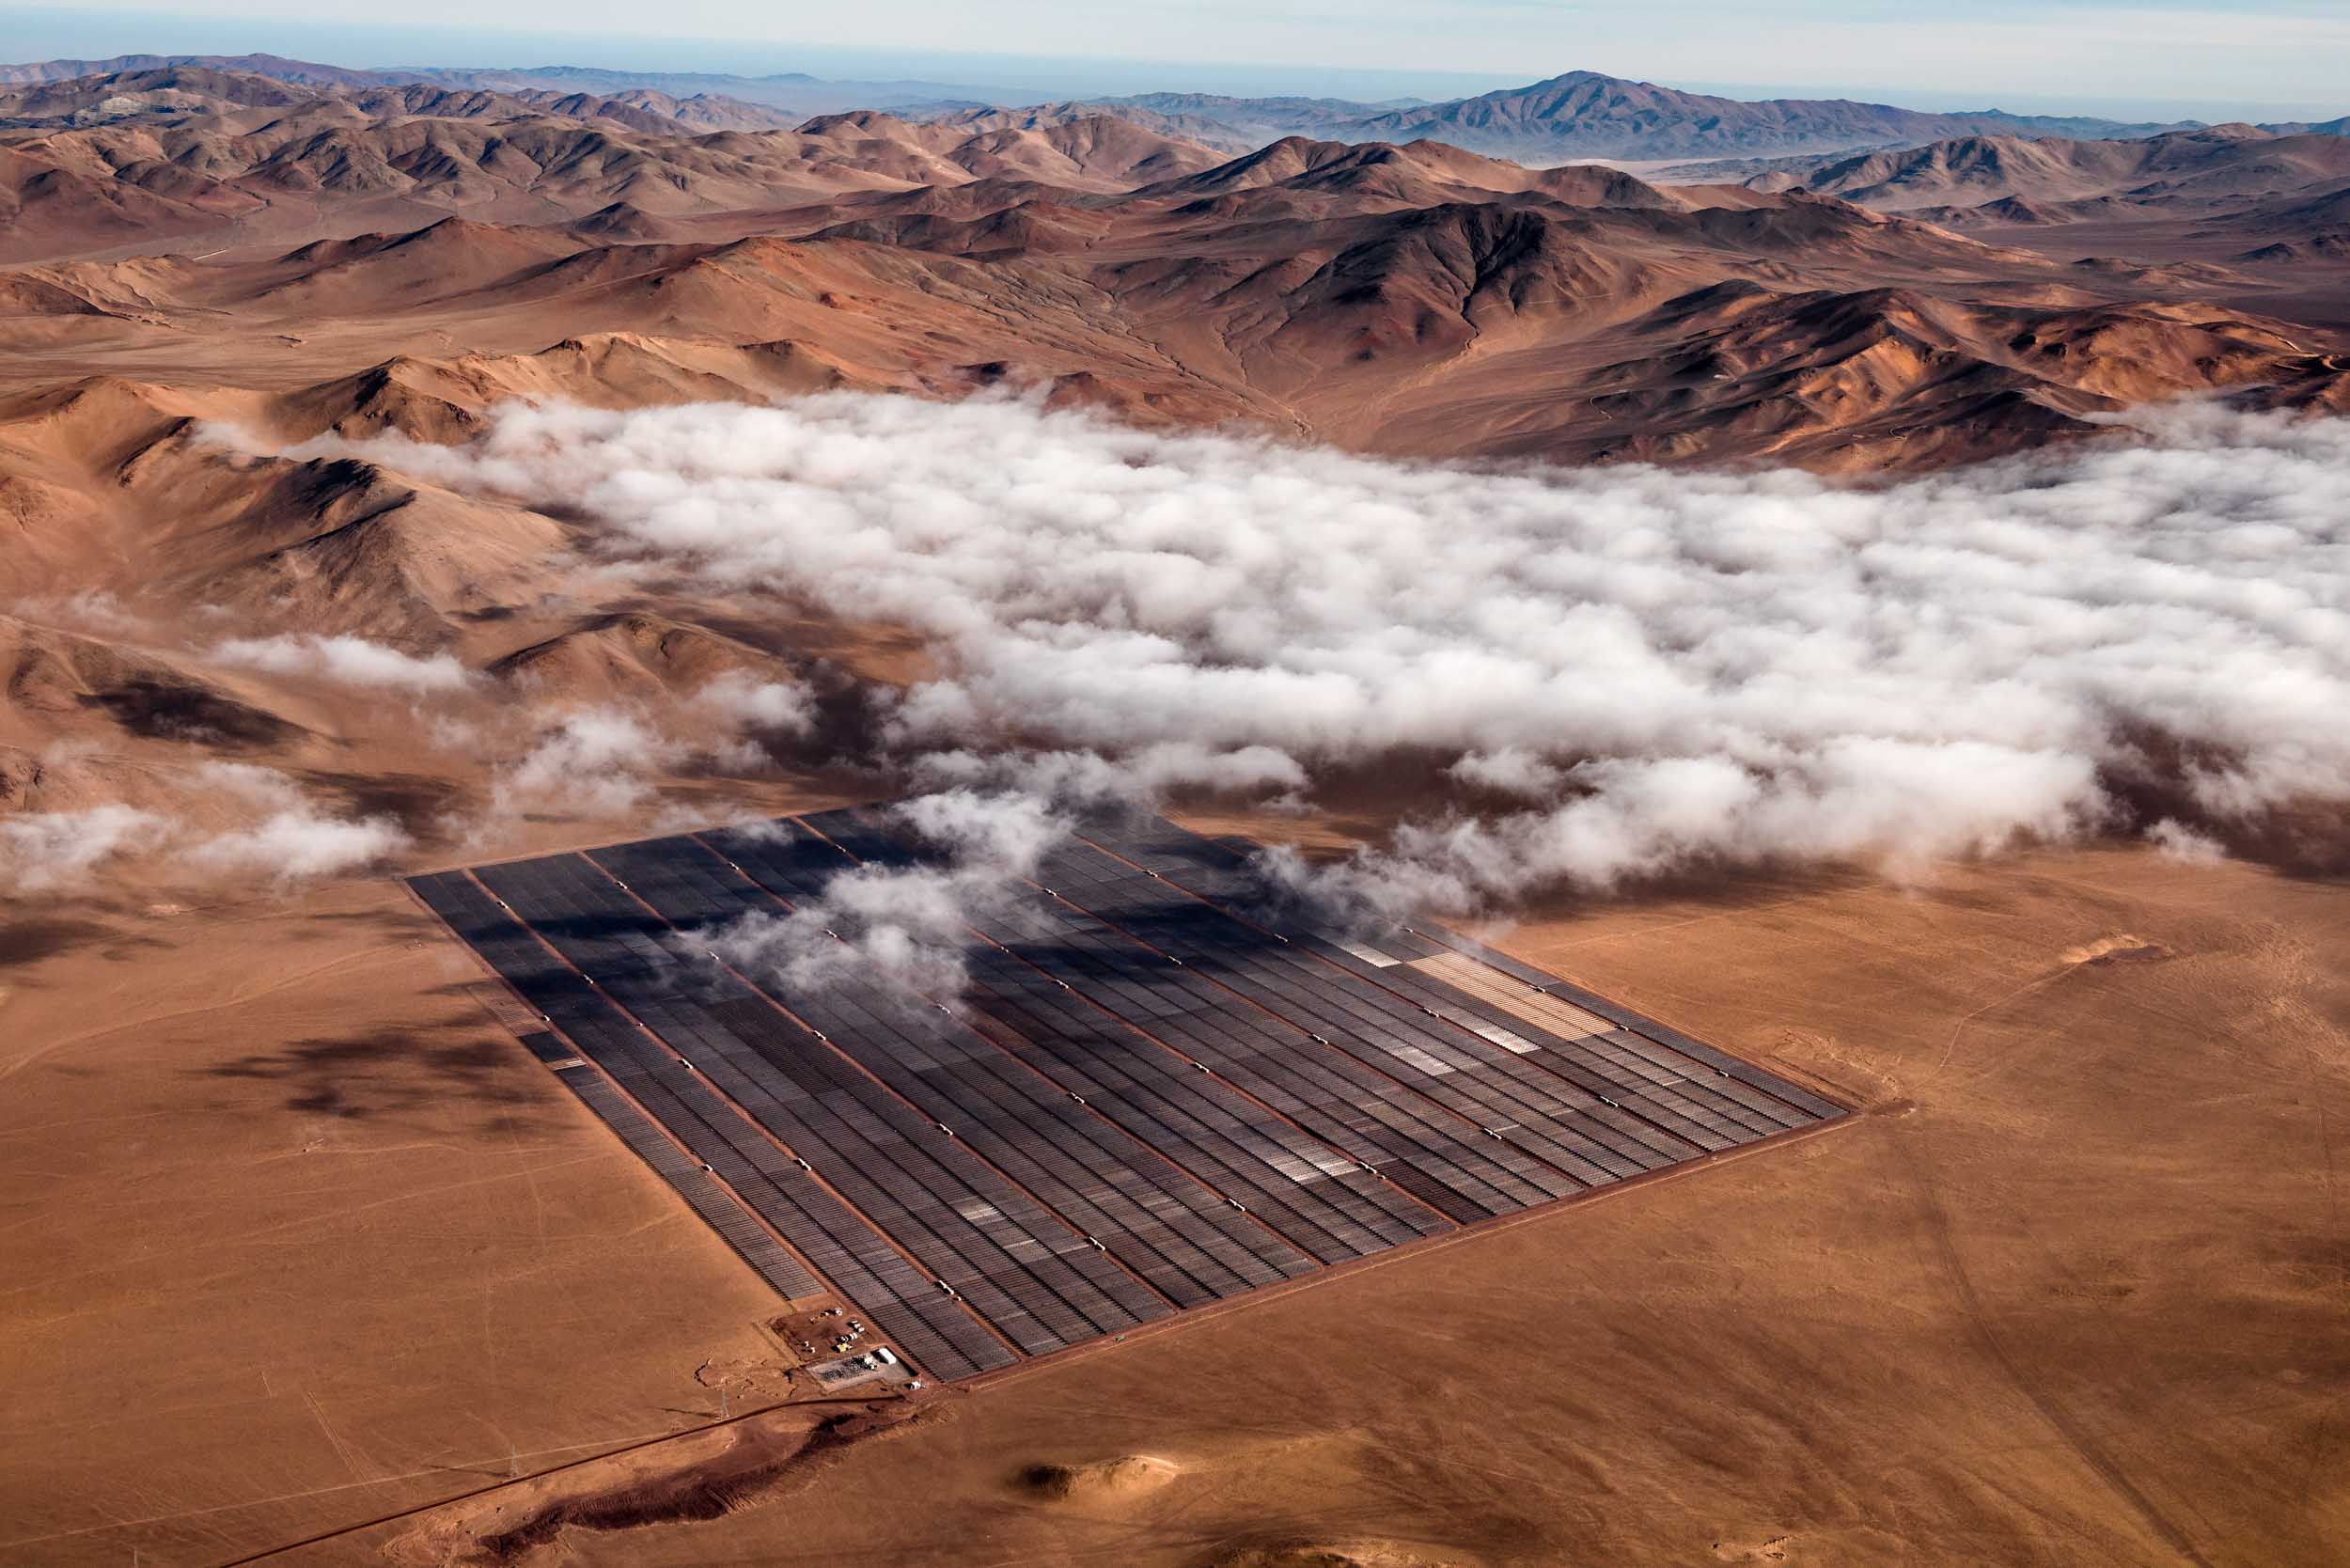 Amanecer Solar SpA built its photovoltaic plant in the Atacama Desert in a joint arrangement with mining company CAP Group. It mainly supplies the latter’s Cerro Negro Norte iron ore mine.